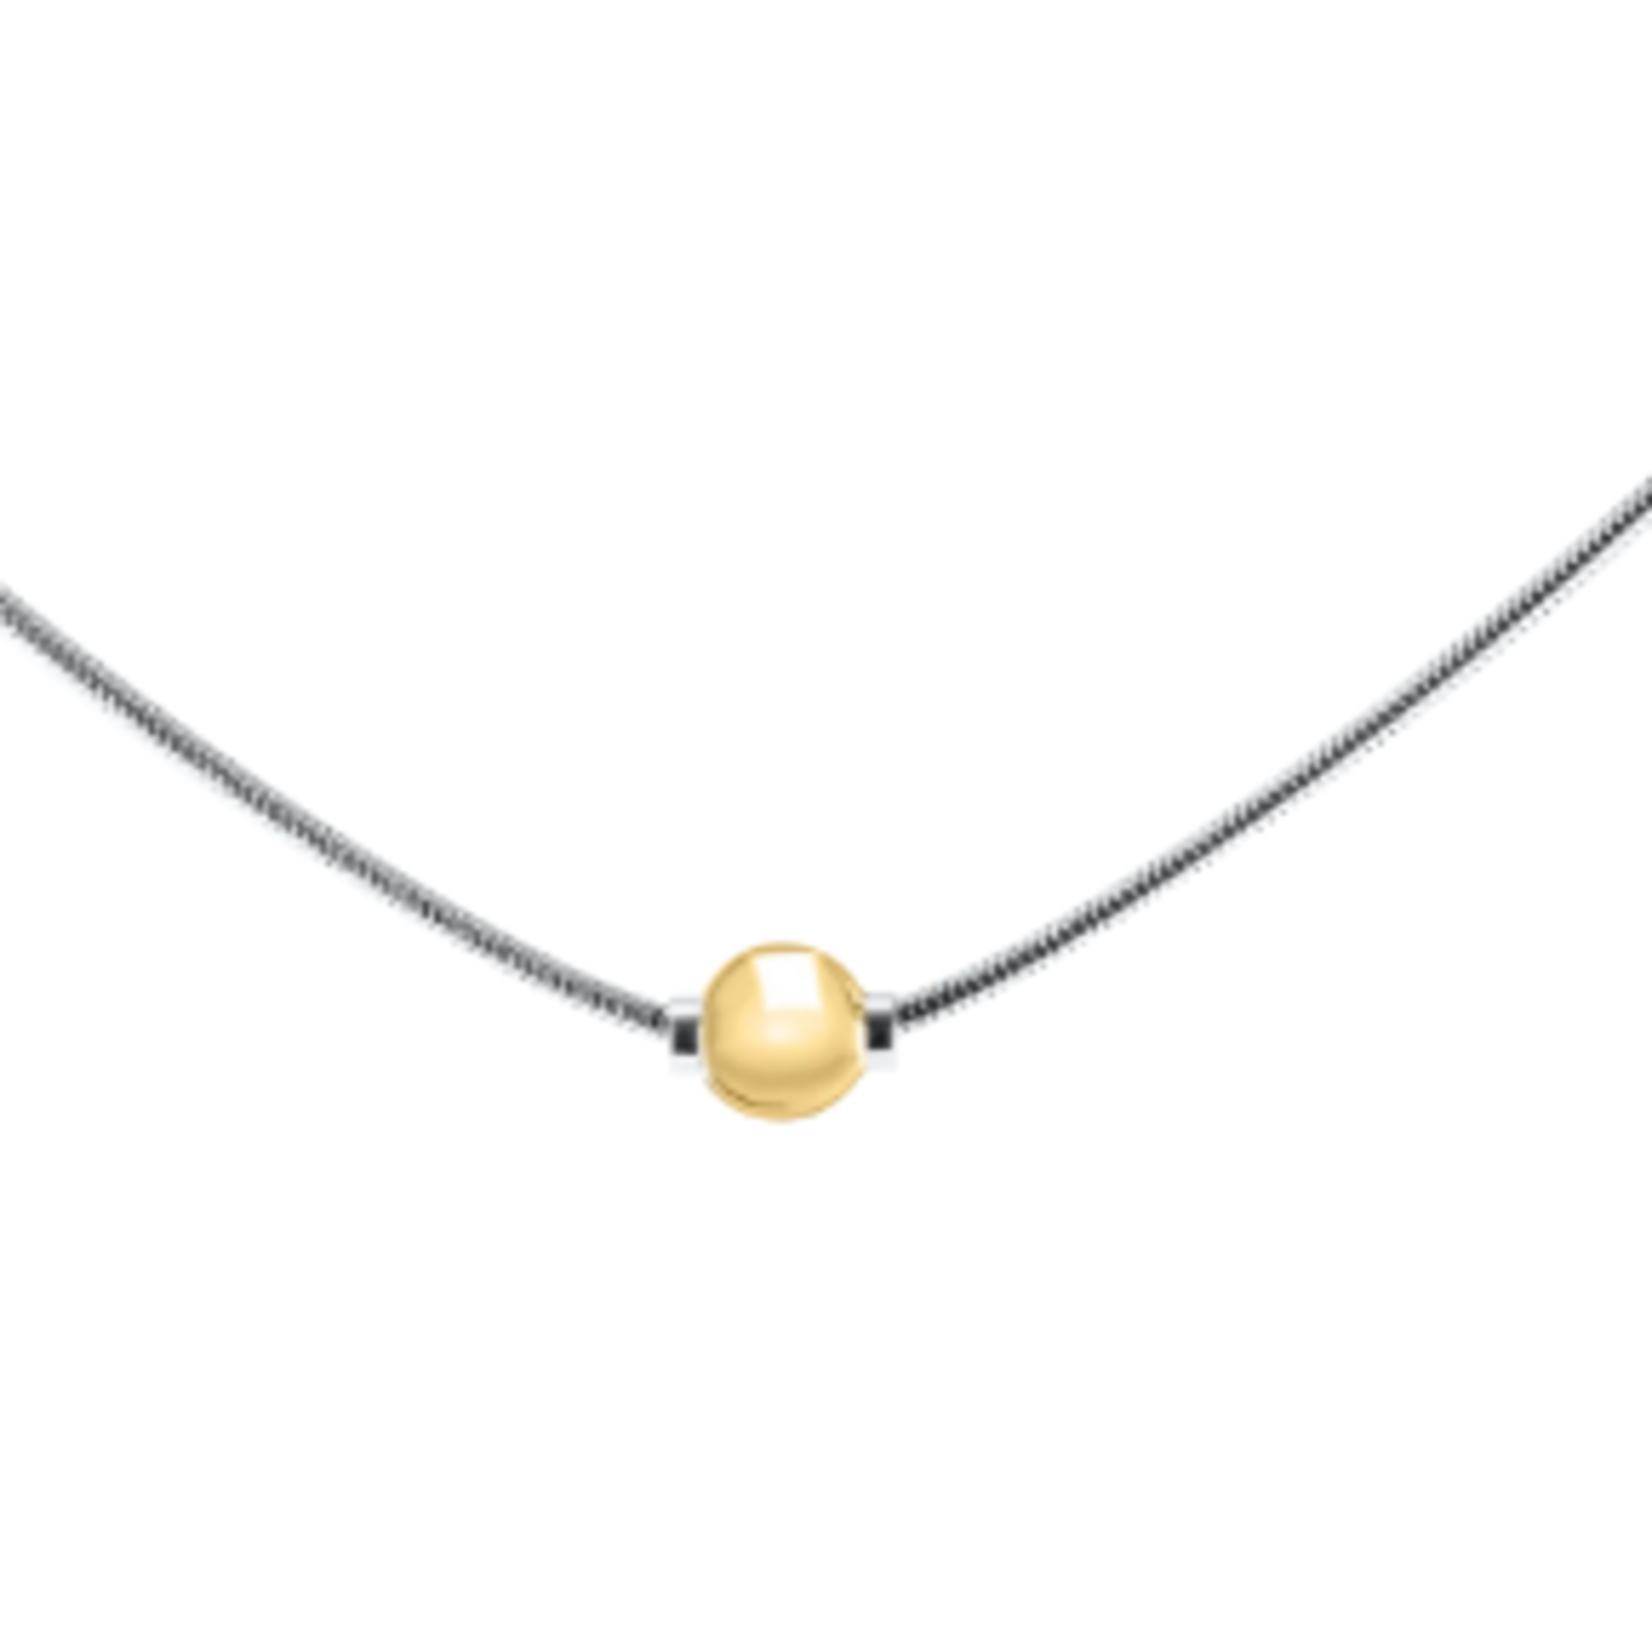 Marathon Jewelry Cape Cod Necklace, 14K Yellow Gold Bead on 16" Sterling Snake Chain